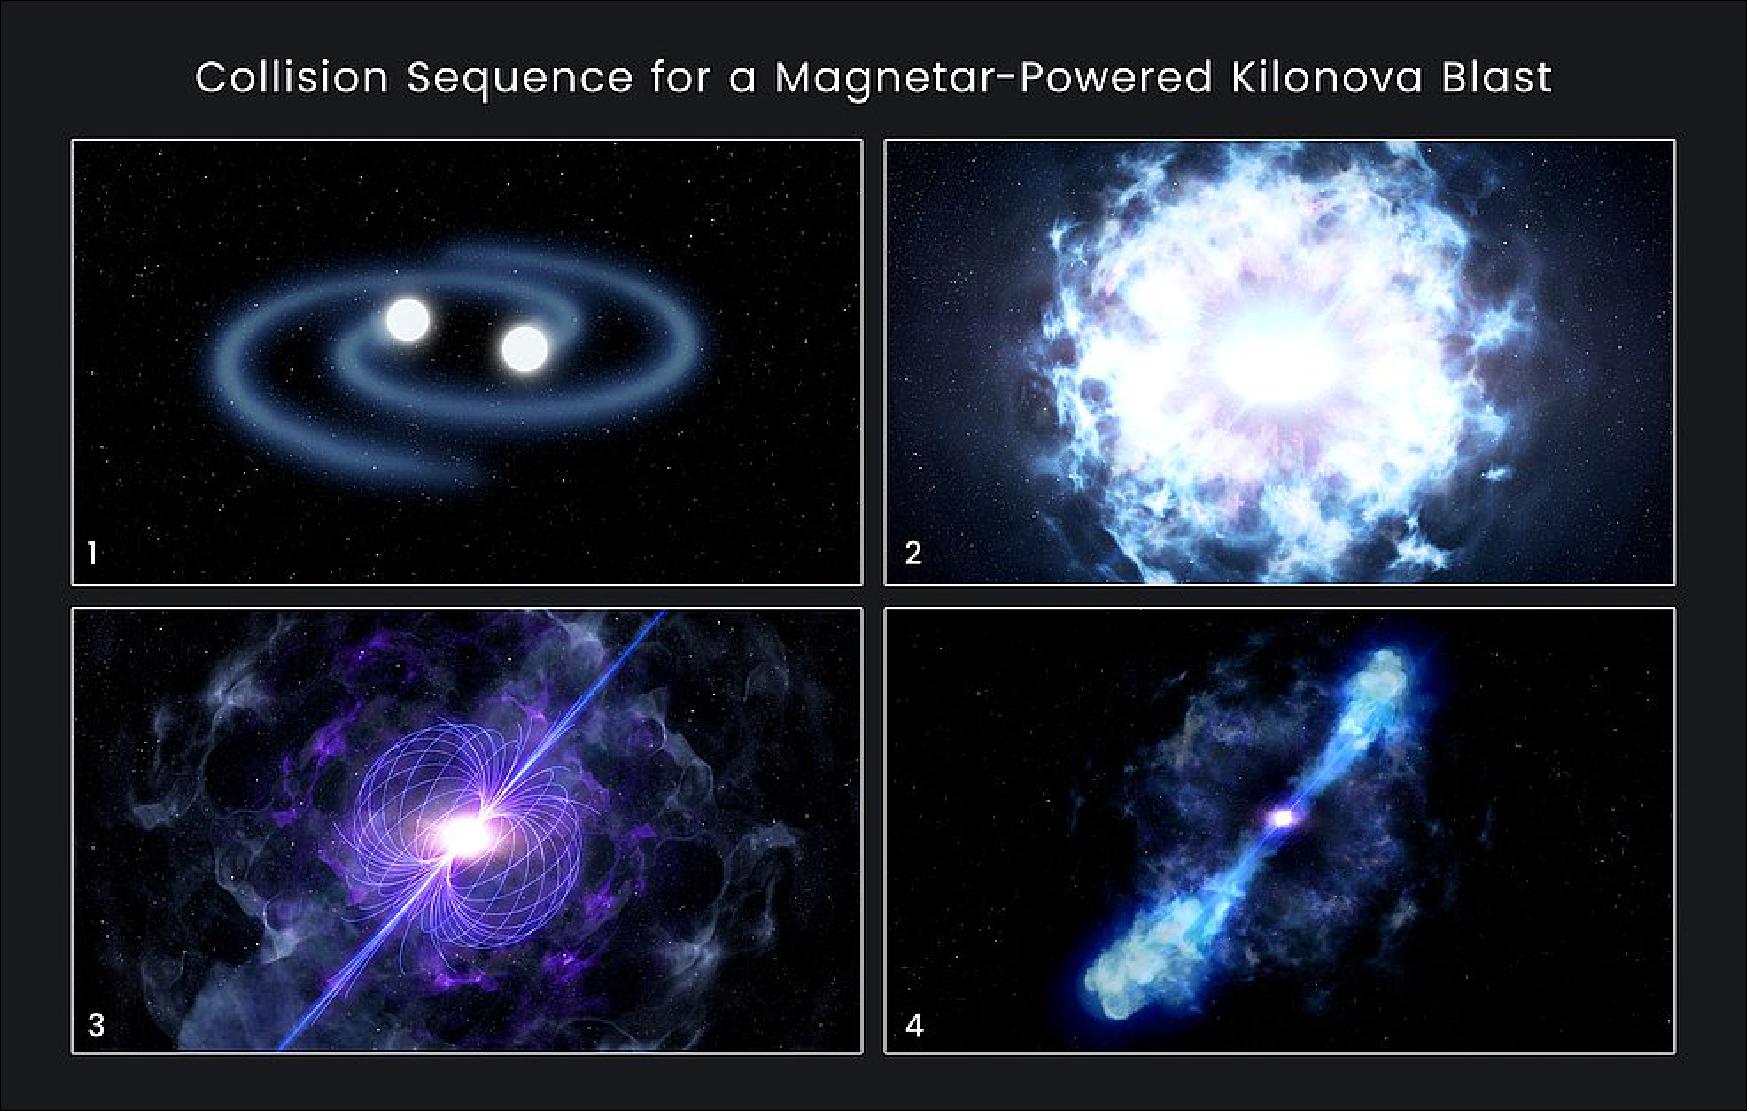 Figure 15: This illustration shows the sequence for forming a magnetar-powered kilonova, whose peak brightness reaches up to 10,000 times that of a classical nova. 1) Two orbiting neutron stars spiral closer and closer together. 2) They collide and merge, triggering an explosion that unleashes more energy in a half-second than the Sun will produce over its entire 10-billion-year lifetime. 3) The merger forms an even more massive neutron star called a magnetar, which has an extraordinarily powerful magnetic field. 4) The magnetar deposits energy into the ejected material, causing it to glow unexpectedly bright at infrared wavelengths[image credits: NASA, ESA, and D. Player (STScI)]